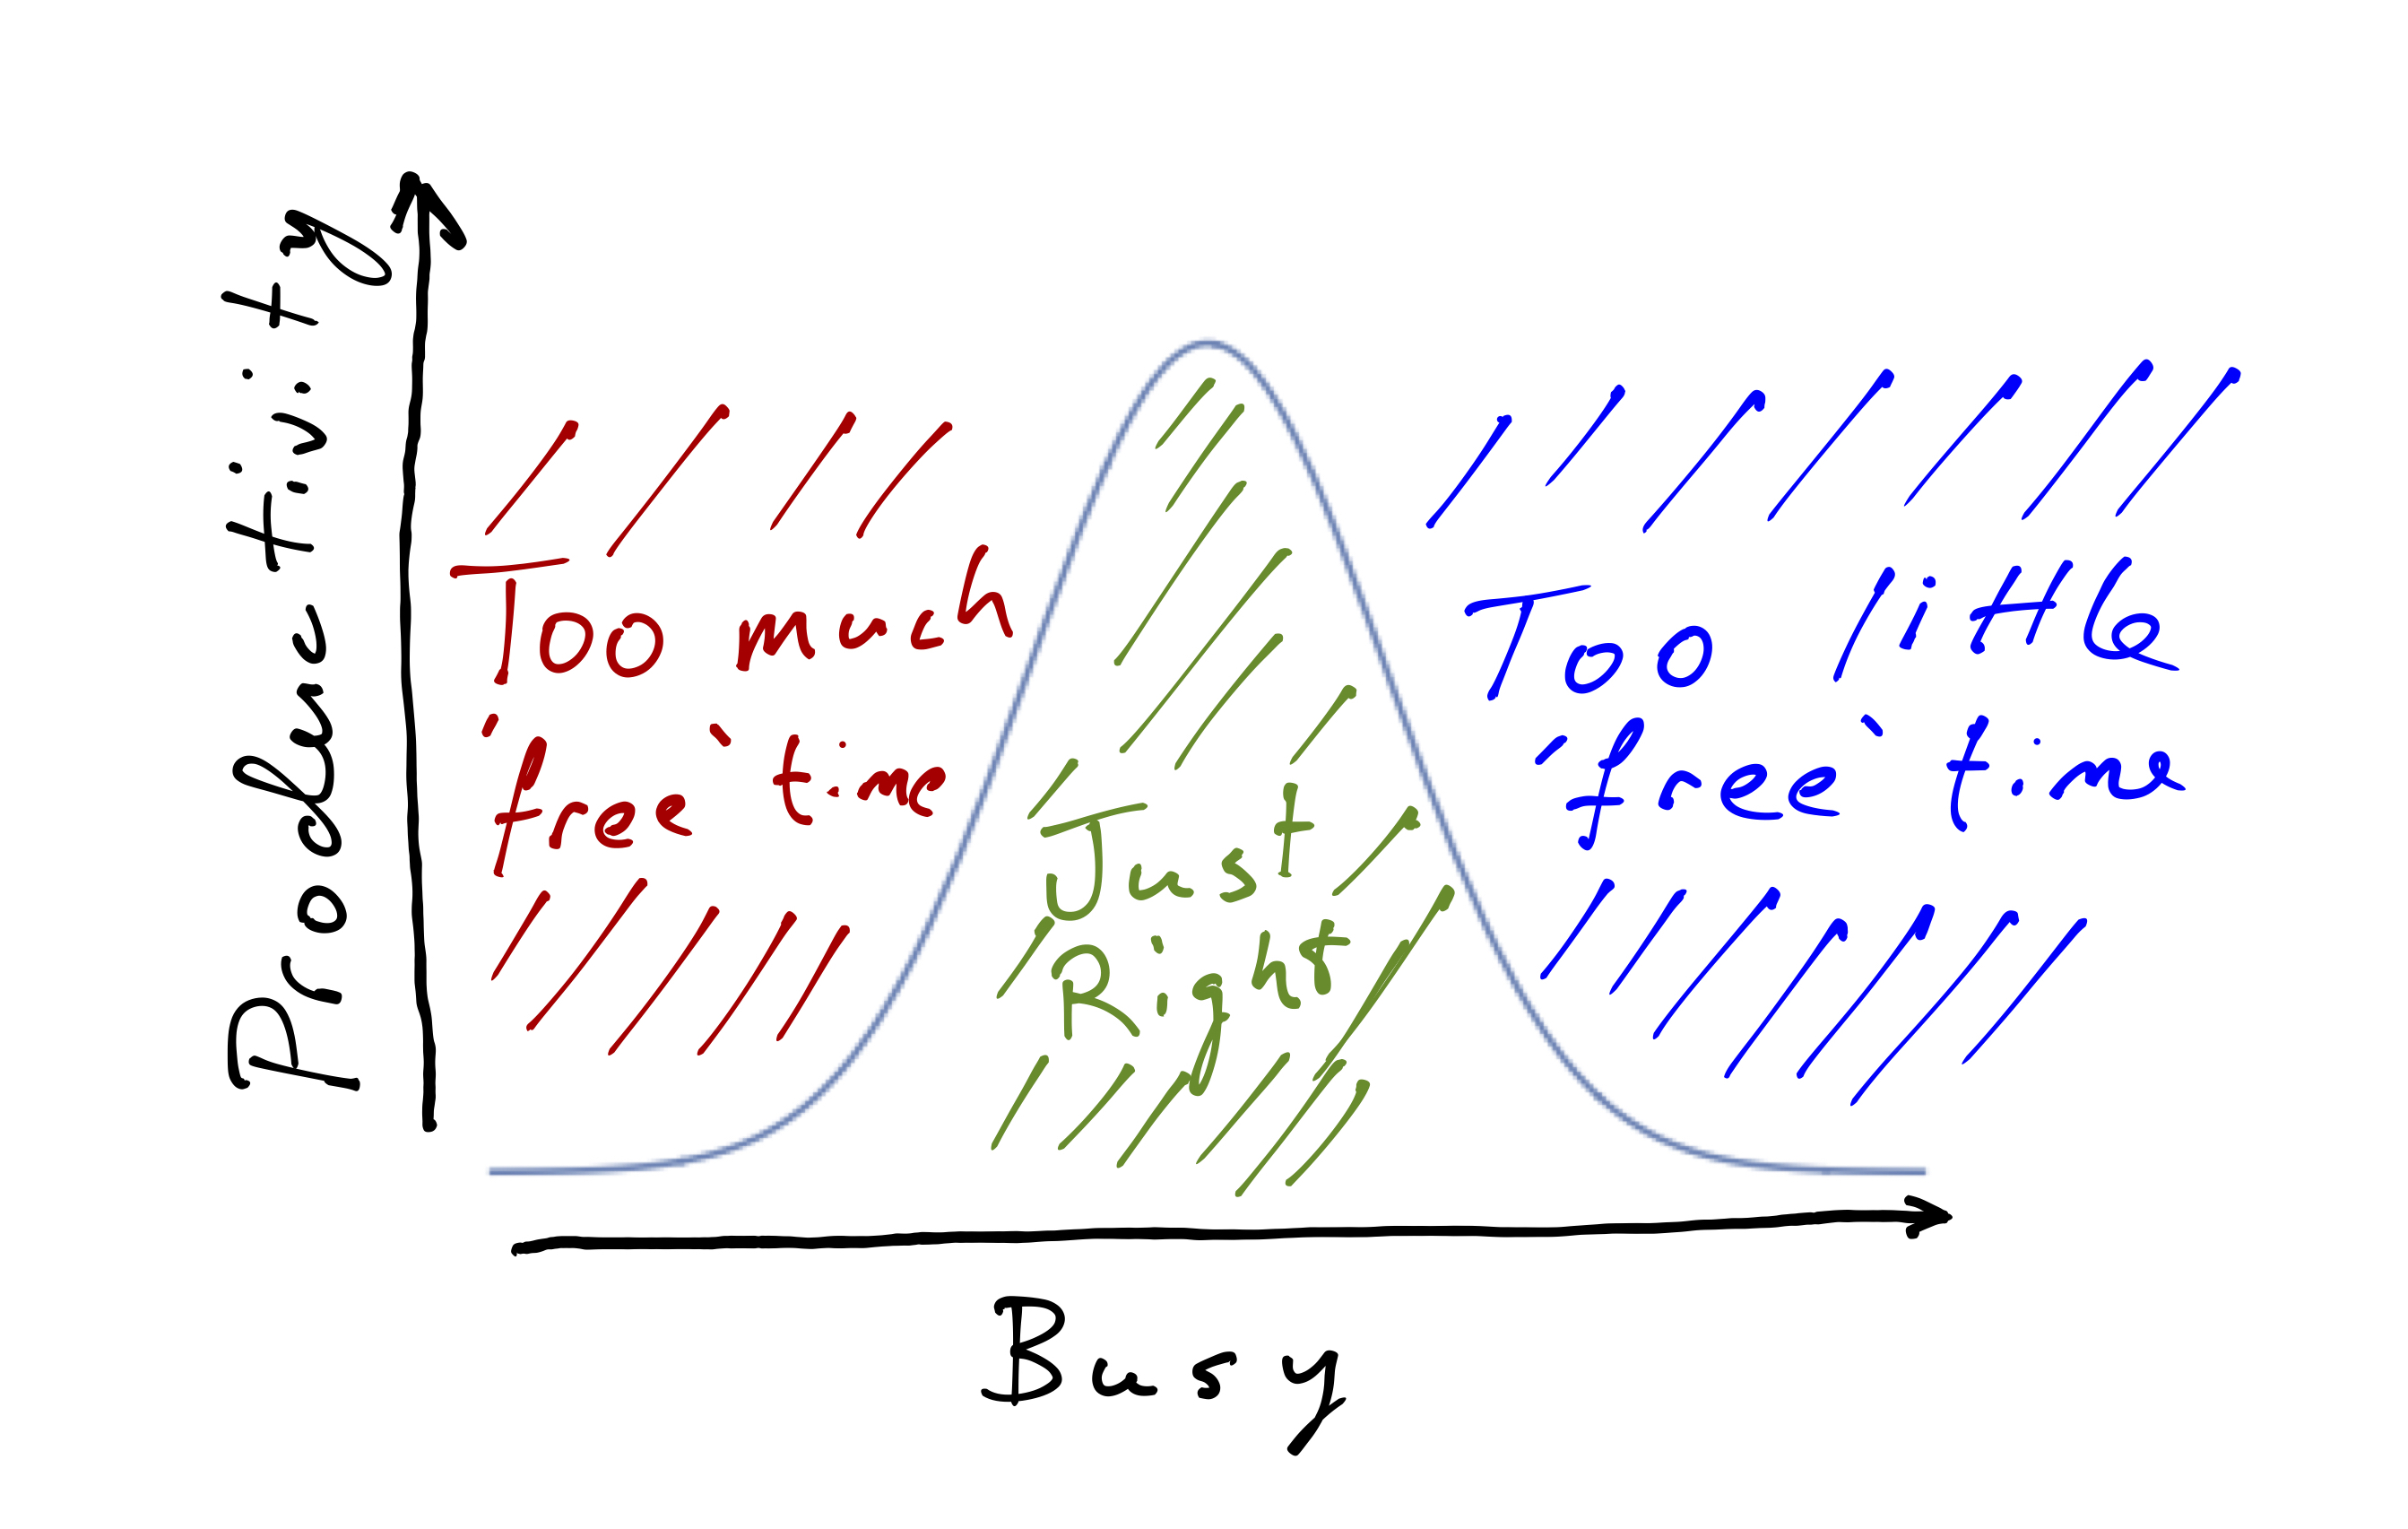 The relationship between productivity and things to do.